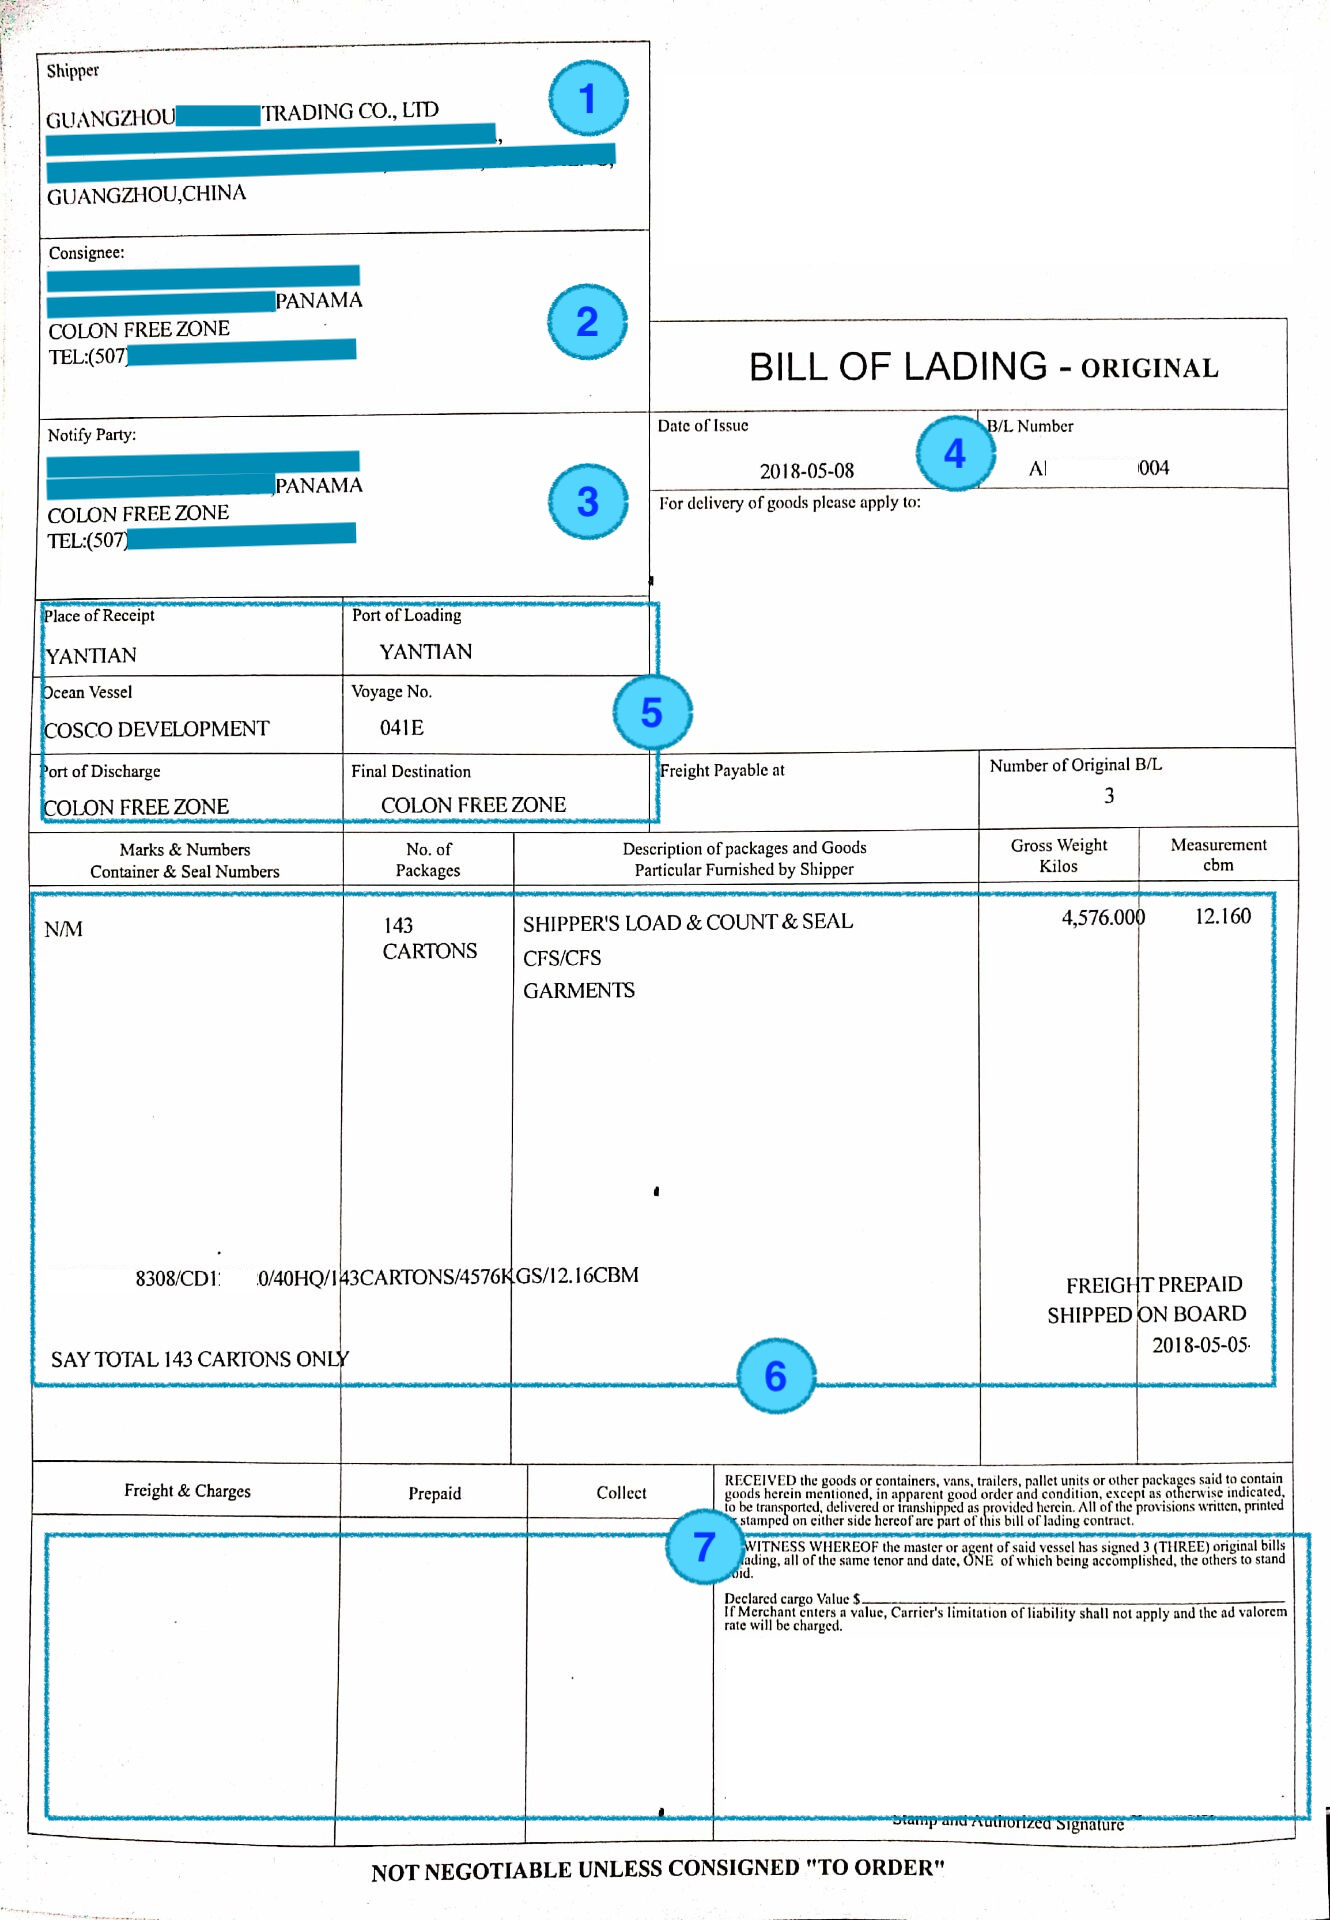 Bills of Lading & Shipping Papers